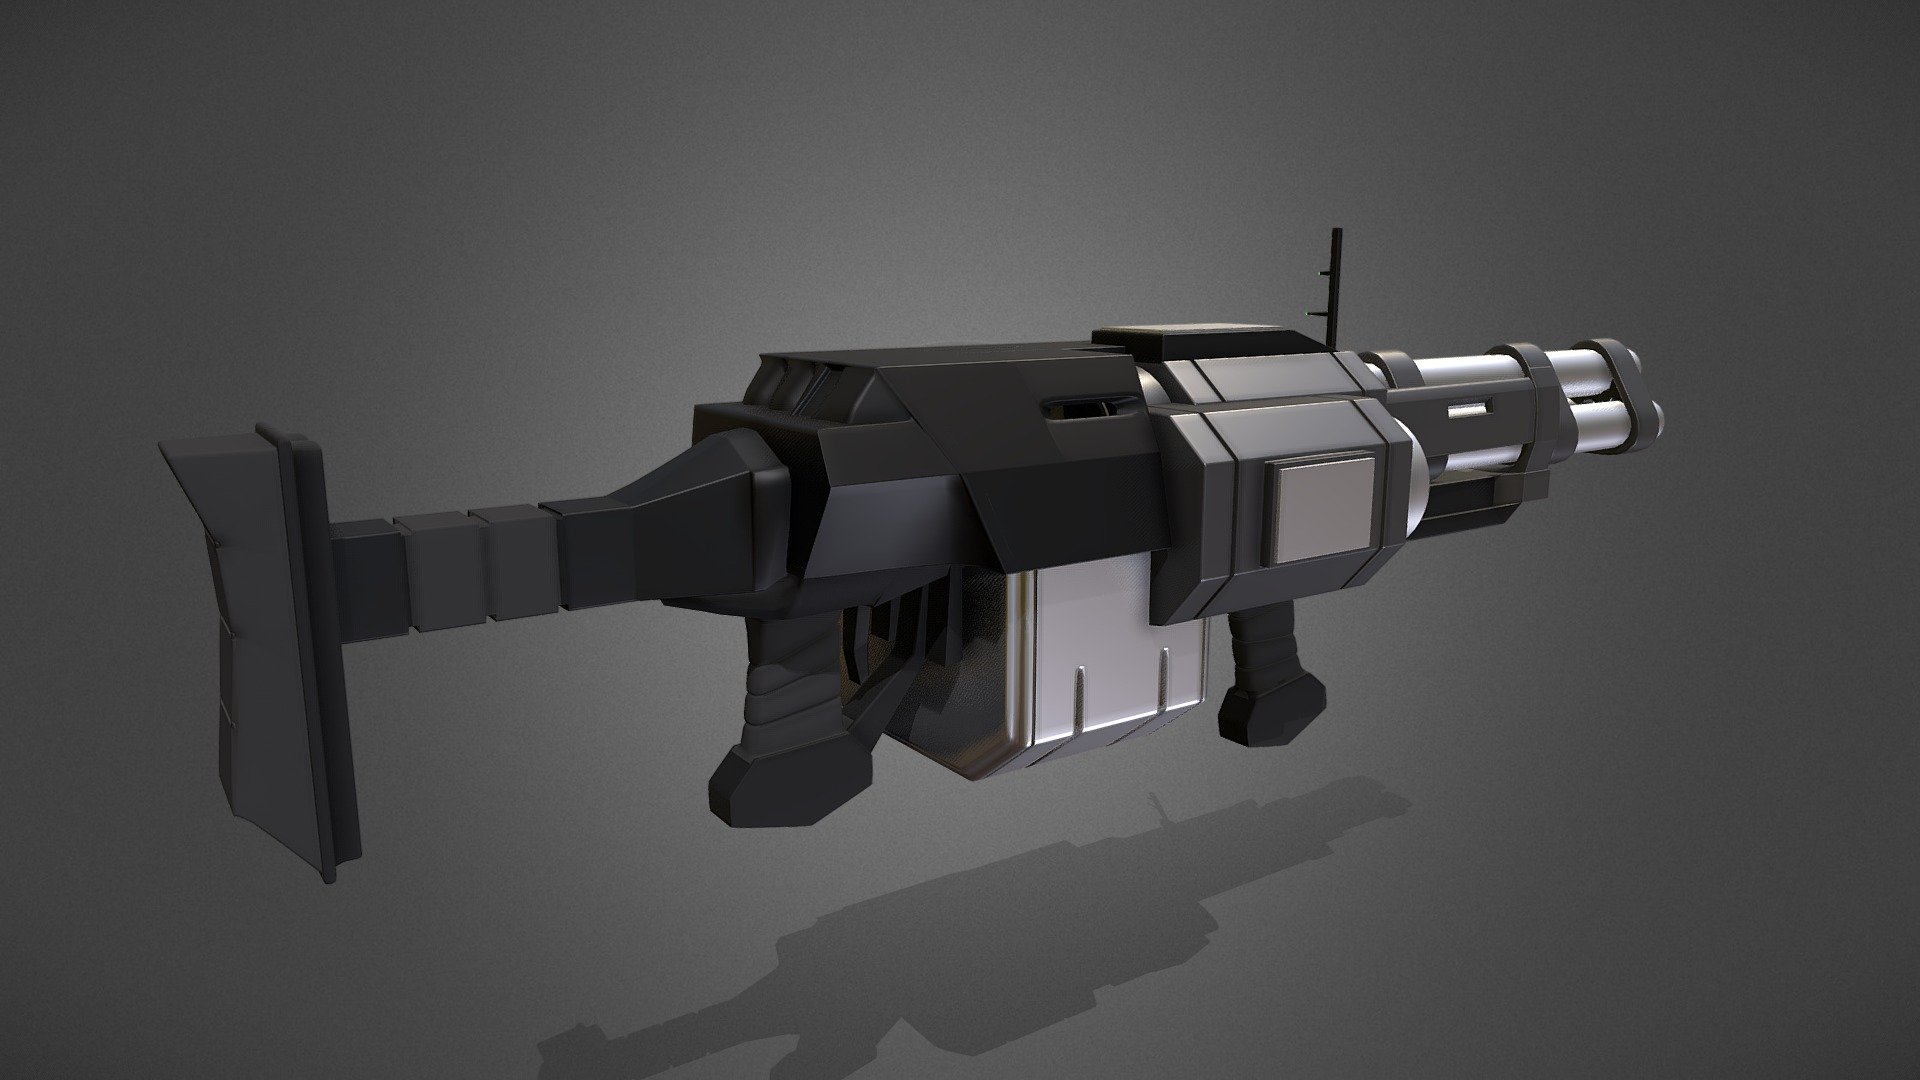 Based Minigun/Assualt concept used in &ldquo;The Incredible True Story FanFic